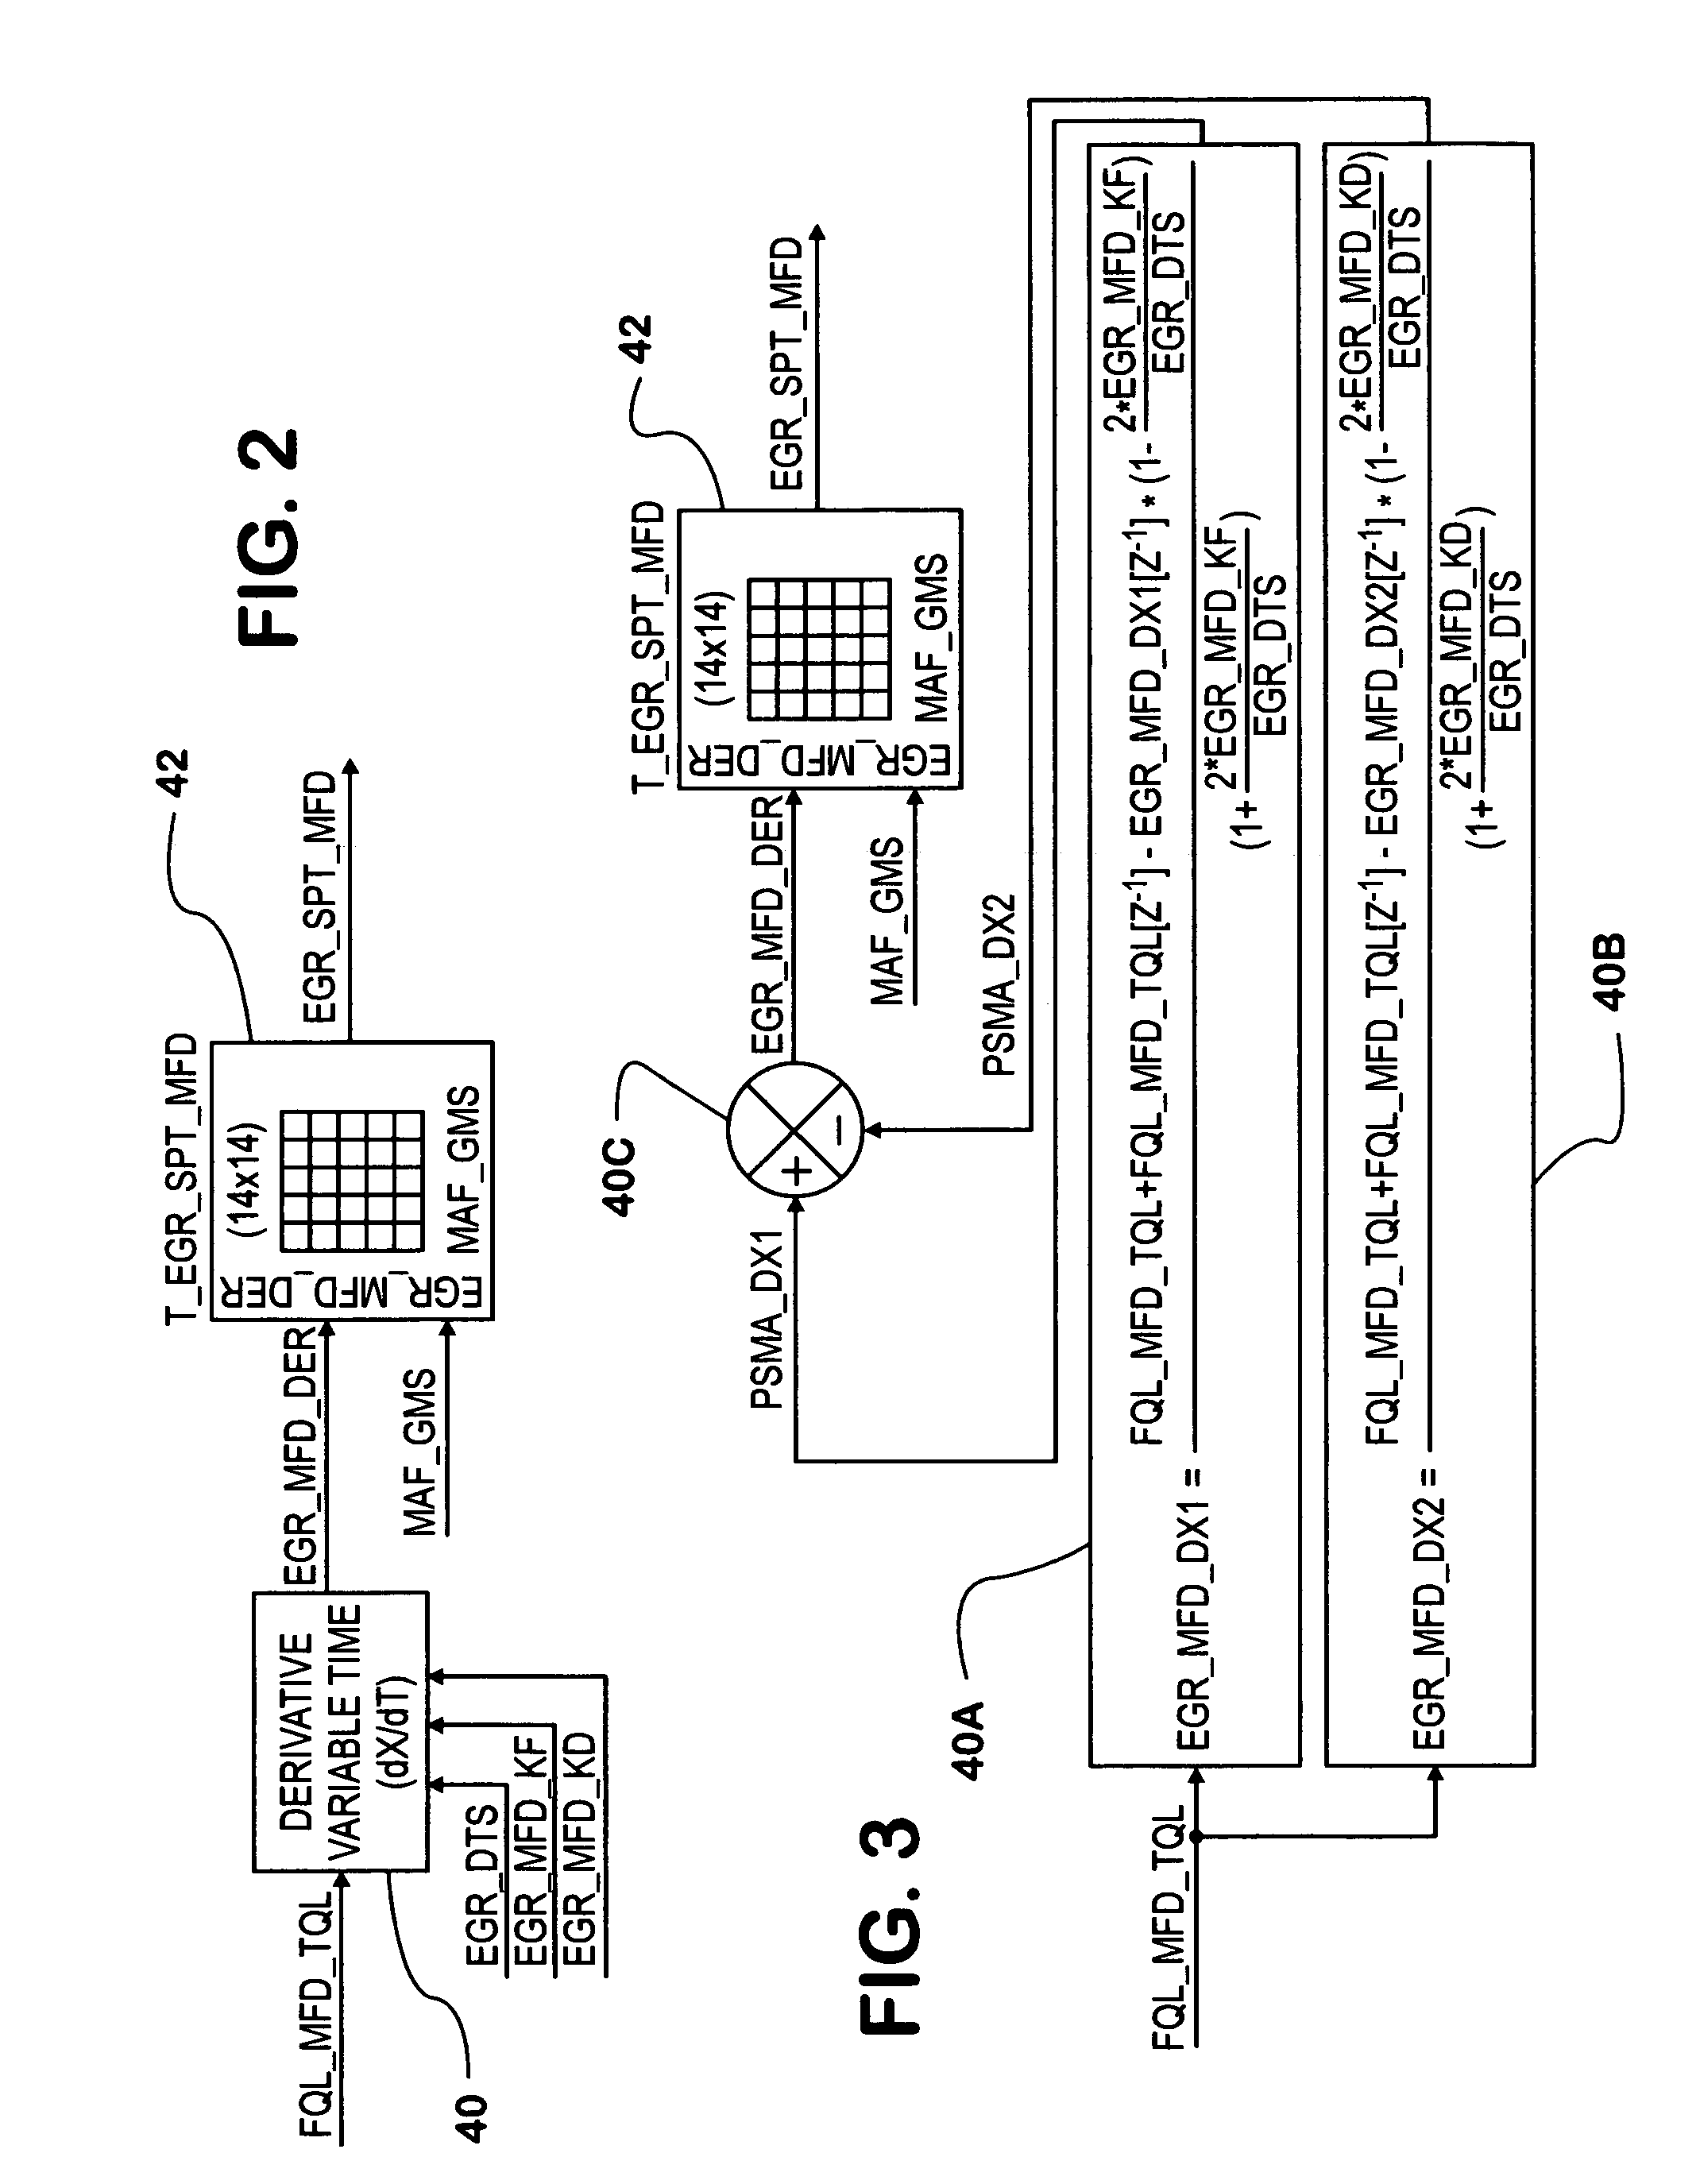 Controlling an engine operating parameter during transients in a control data input by selection of the time interval for calculating the derivative of the control data input